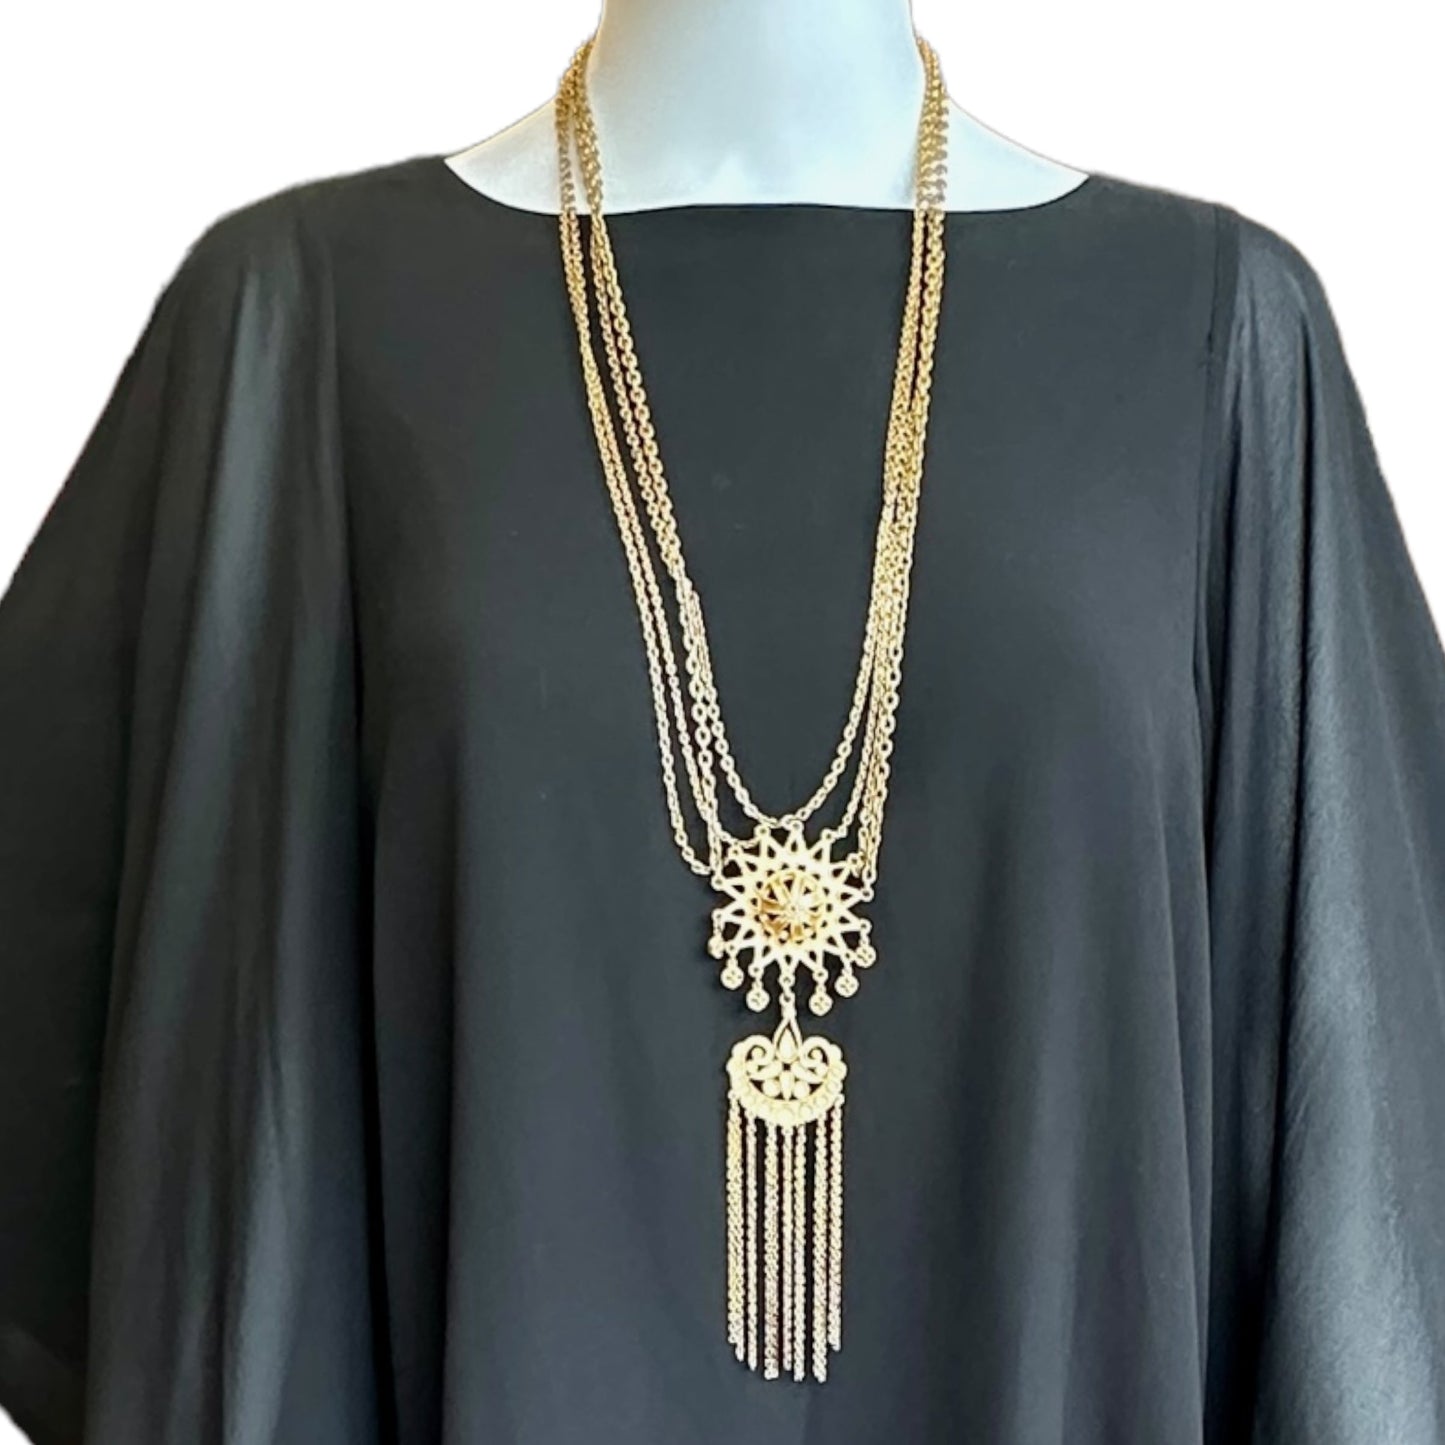 Long Gold Tone Tassel Necklace  By Unknown Brand